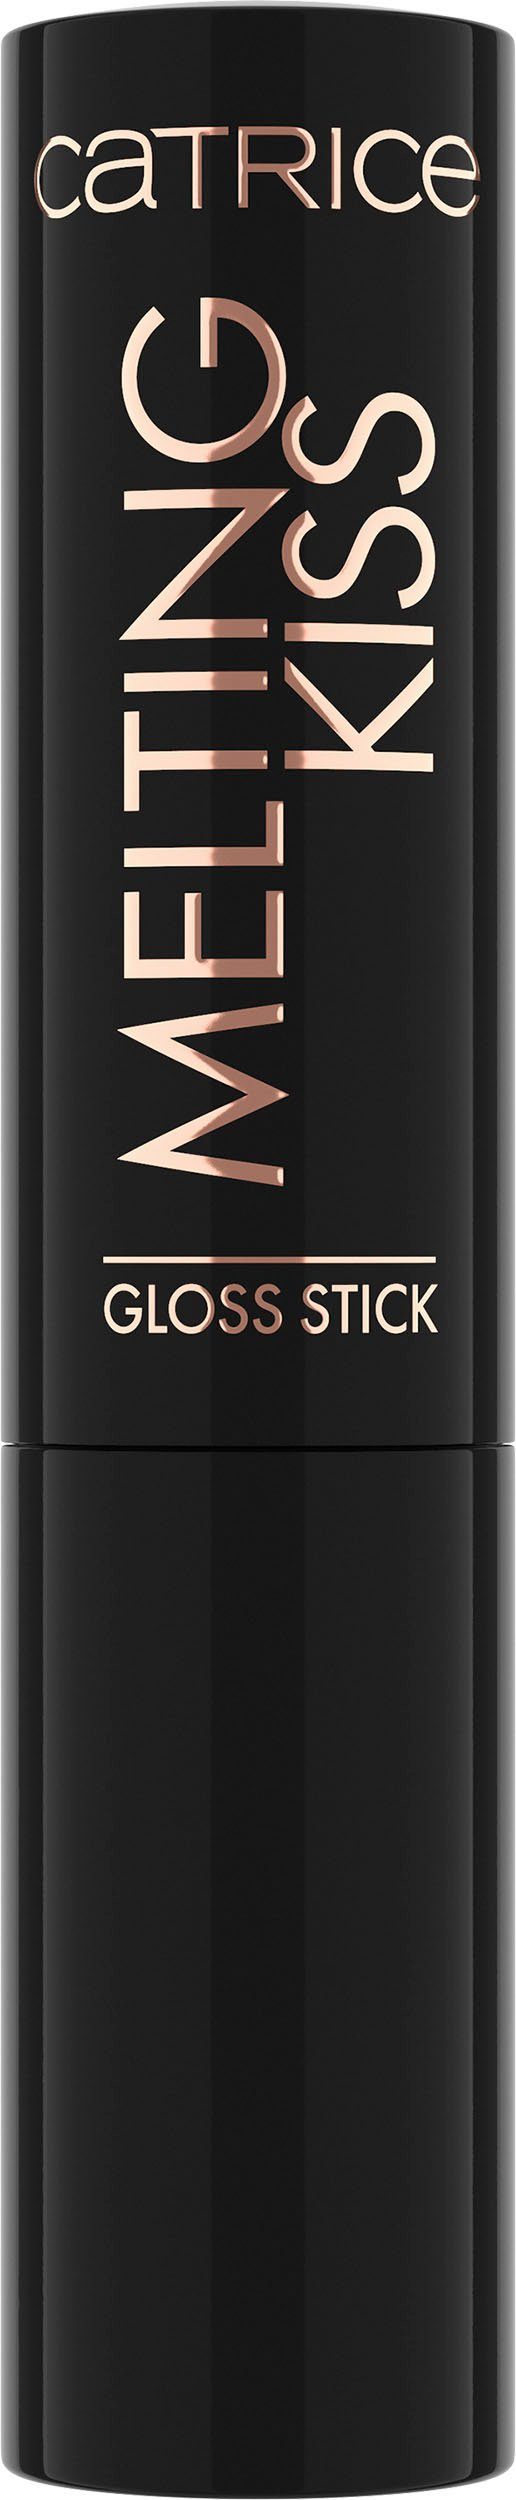 Gloss Stick, strong Lippenstift Melting Kiss Catrice 3-tlg. Catrice connection